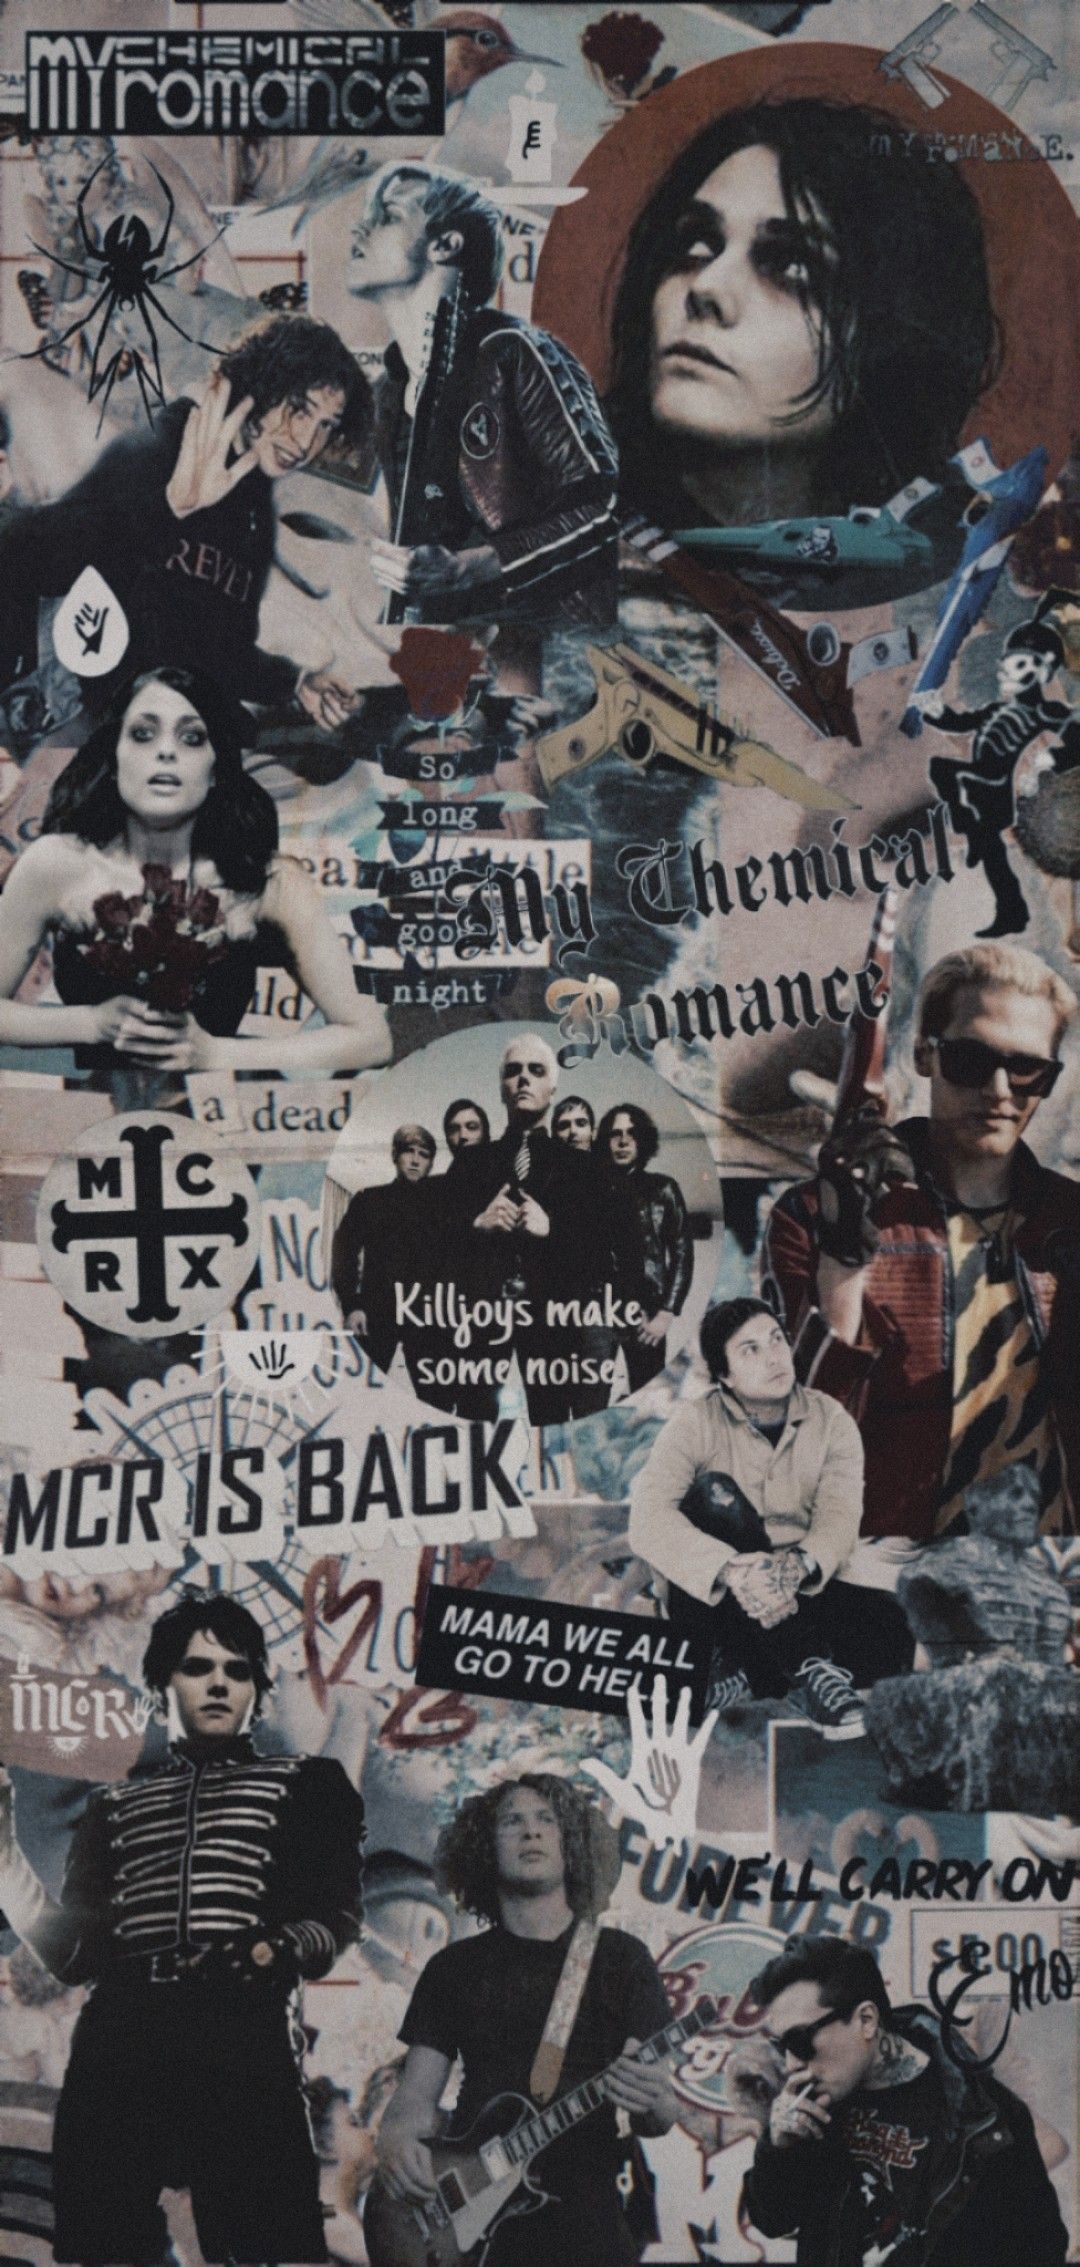 My chemical romance  wallpaper  My chemical romance wallpaper My  chemical romance Emocore wallpaper